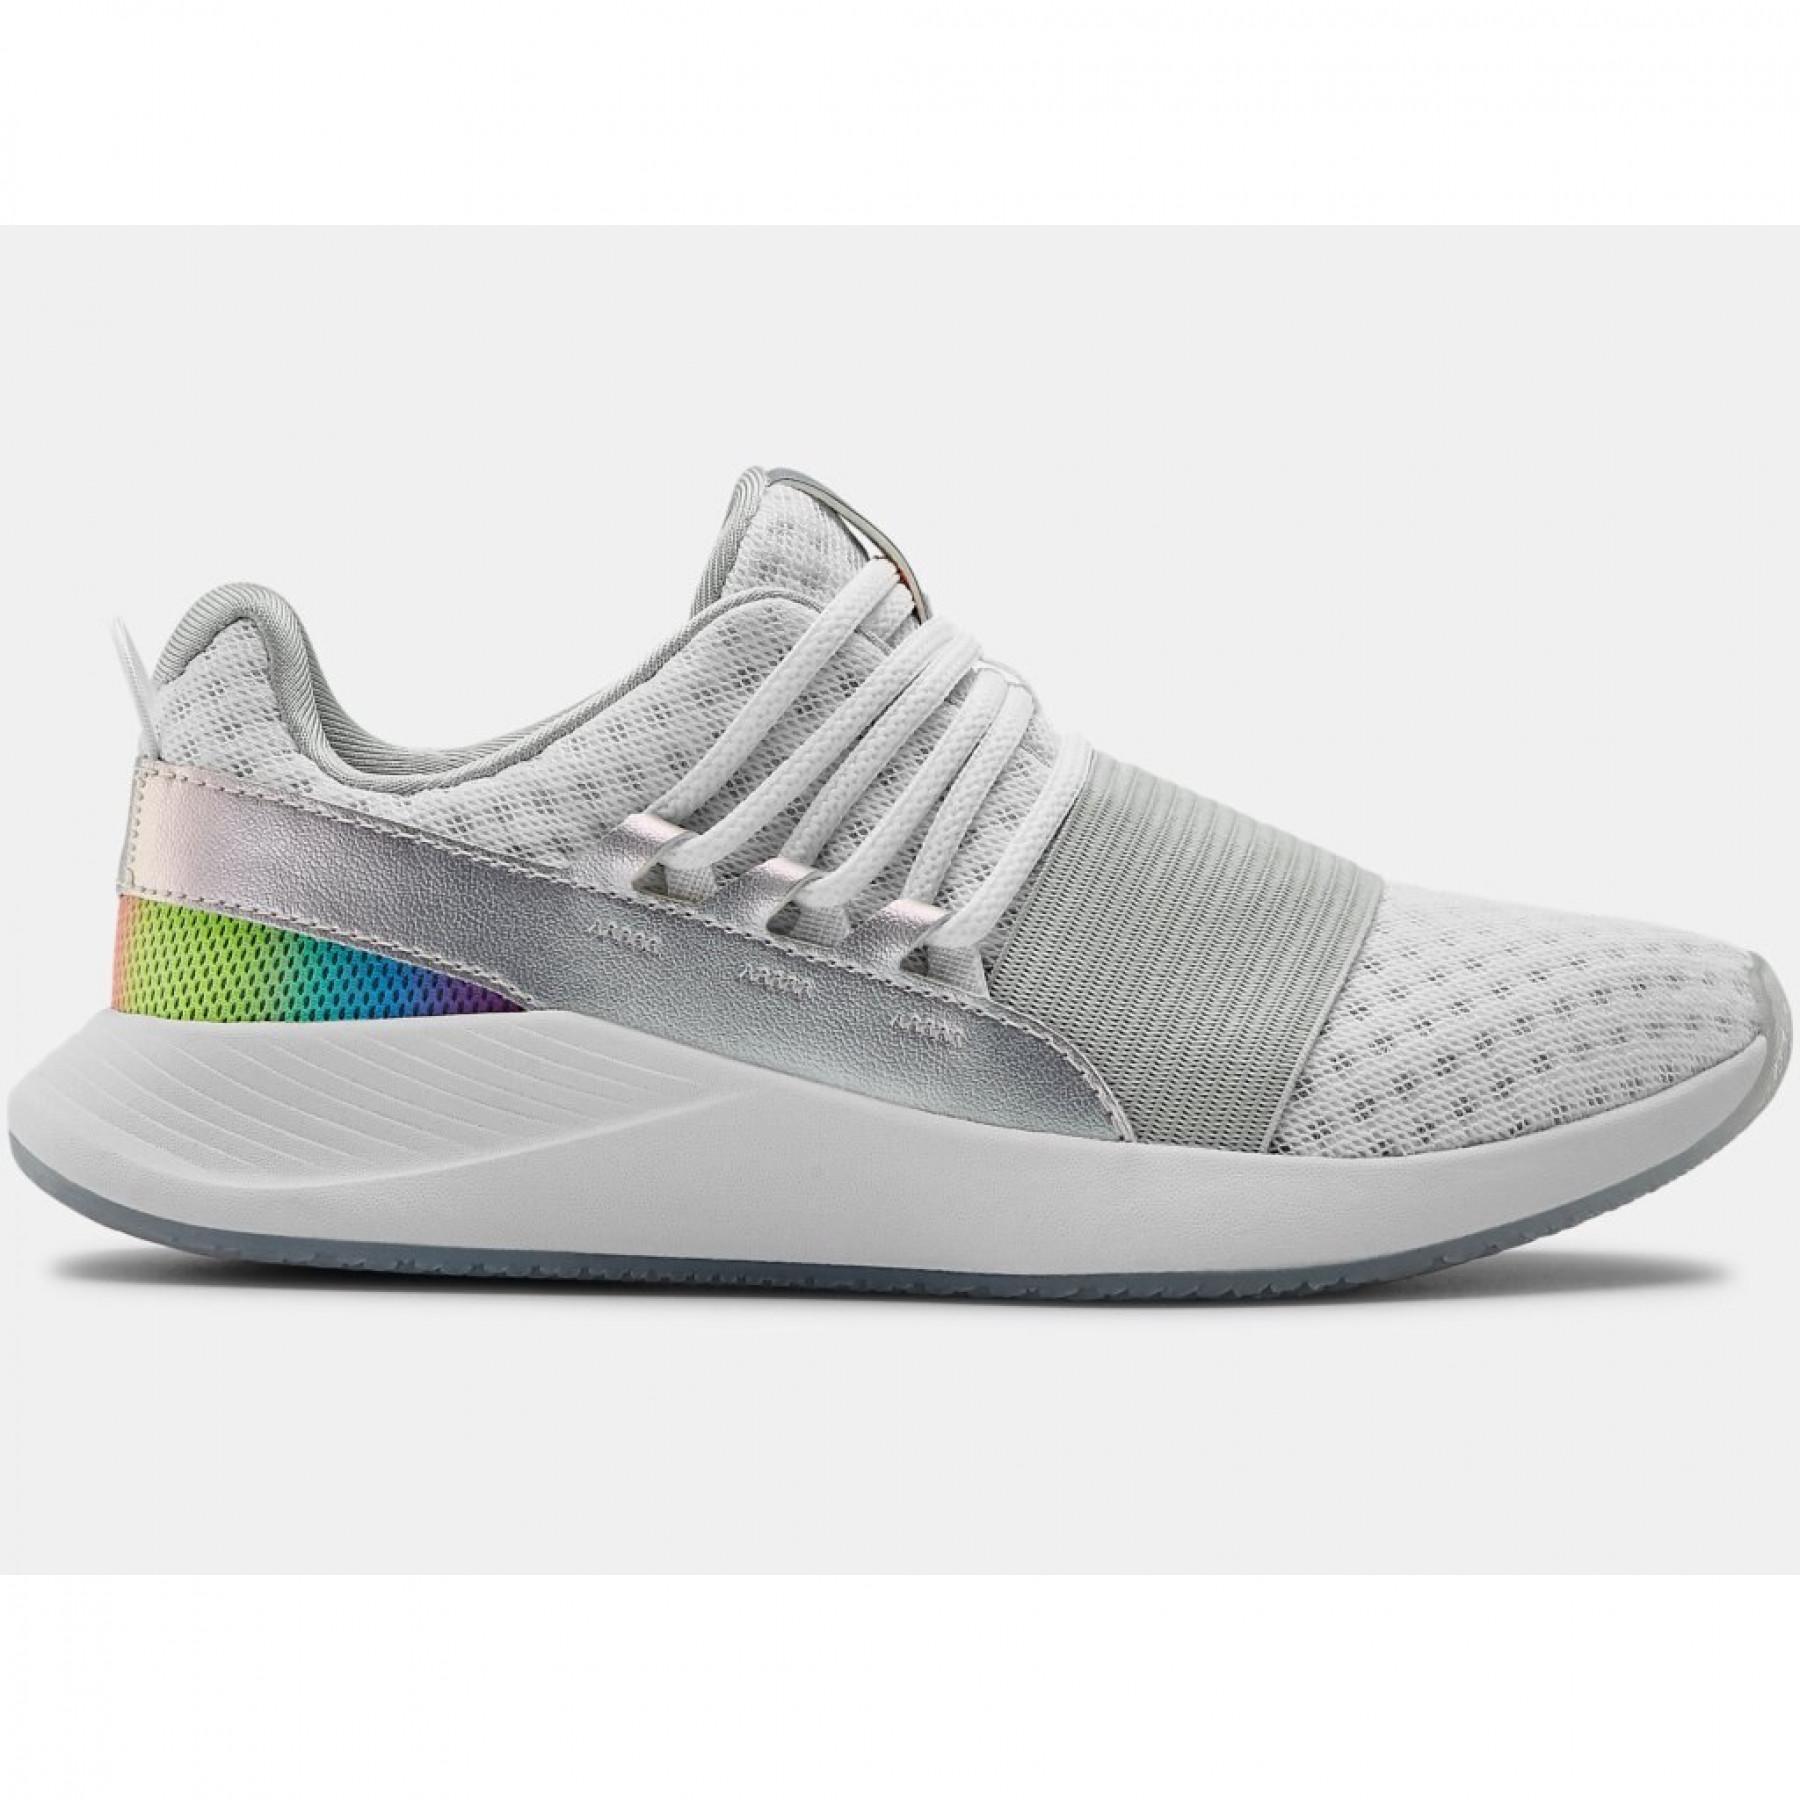 Baskets femme Under Armour Charged Breathe Iridescent